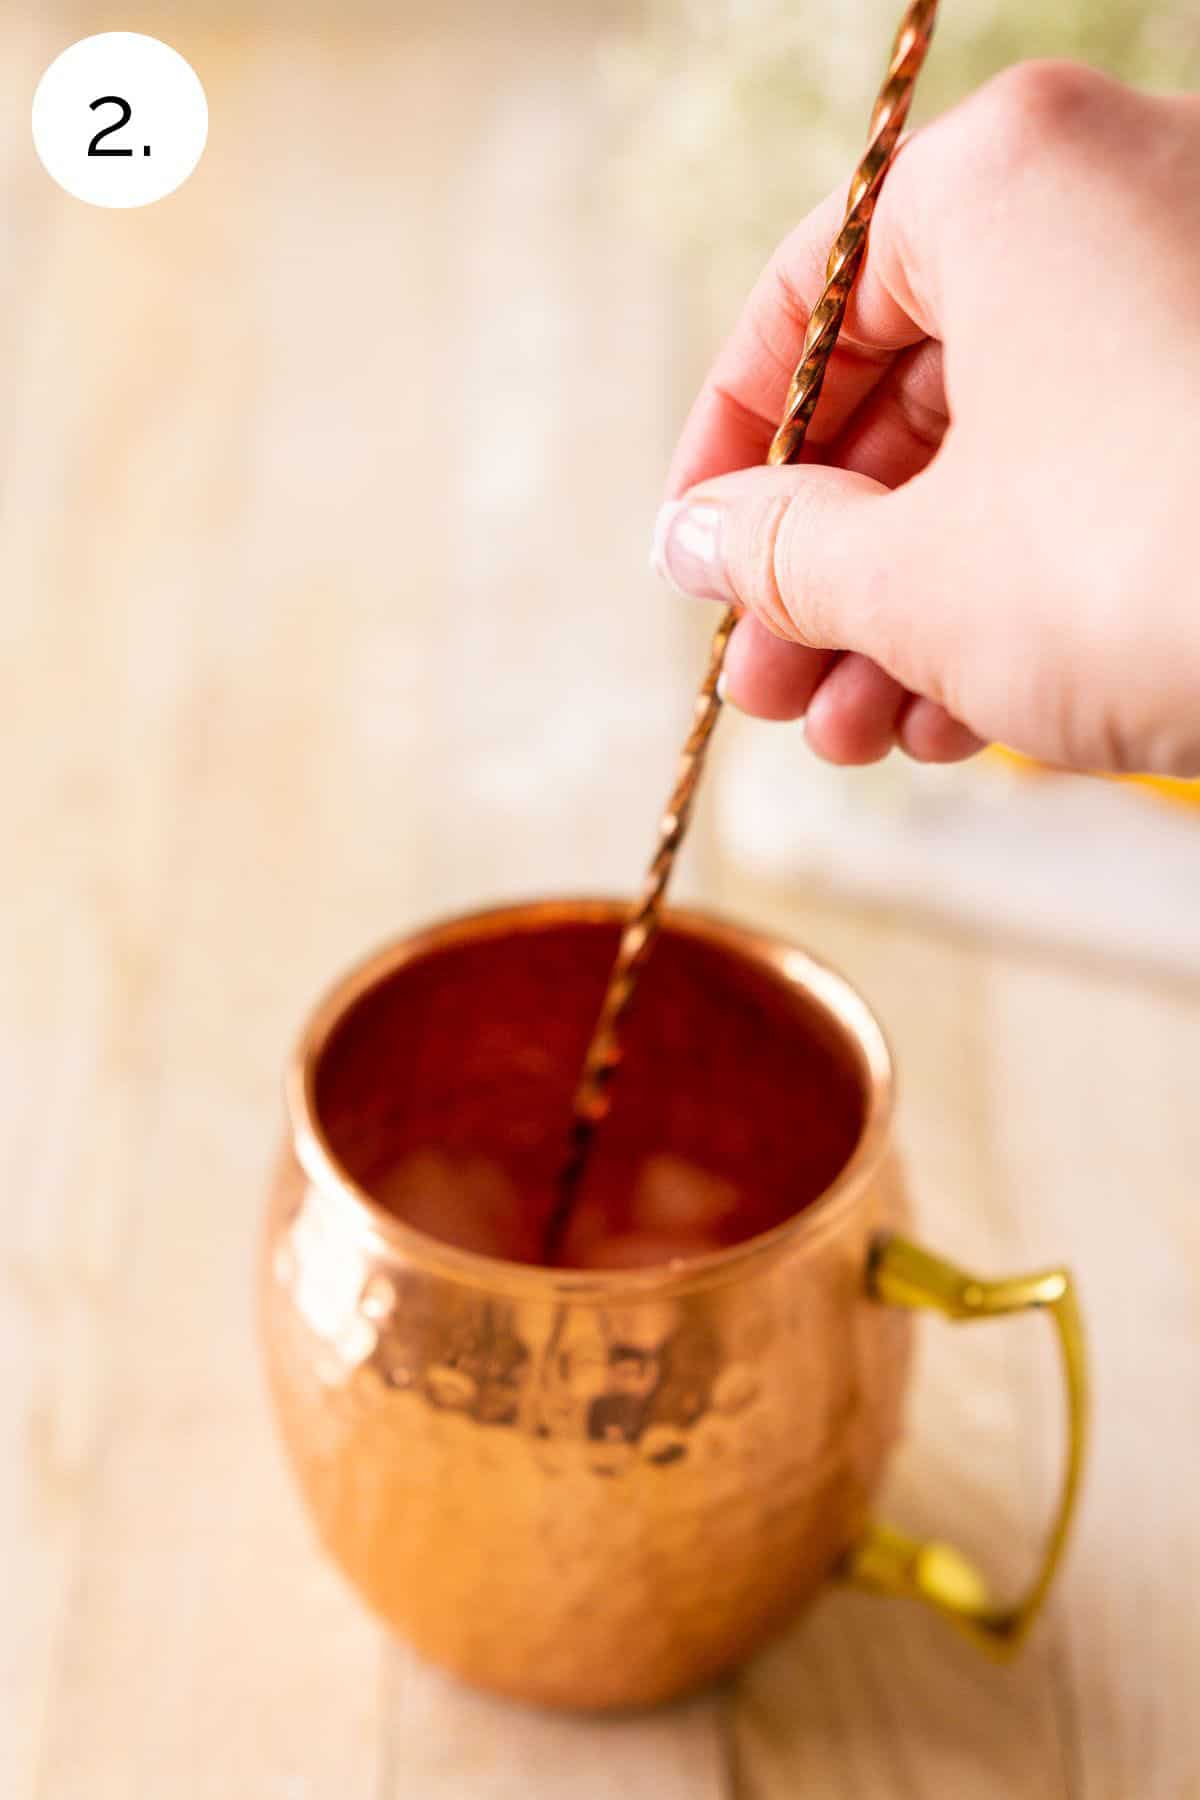 A hand stirring the drink in a copper mug with a long bar spoon on a cream-colored wooden surface.